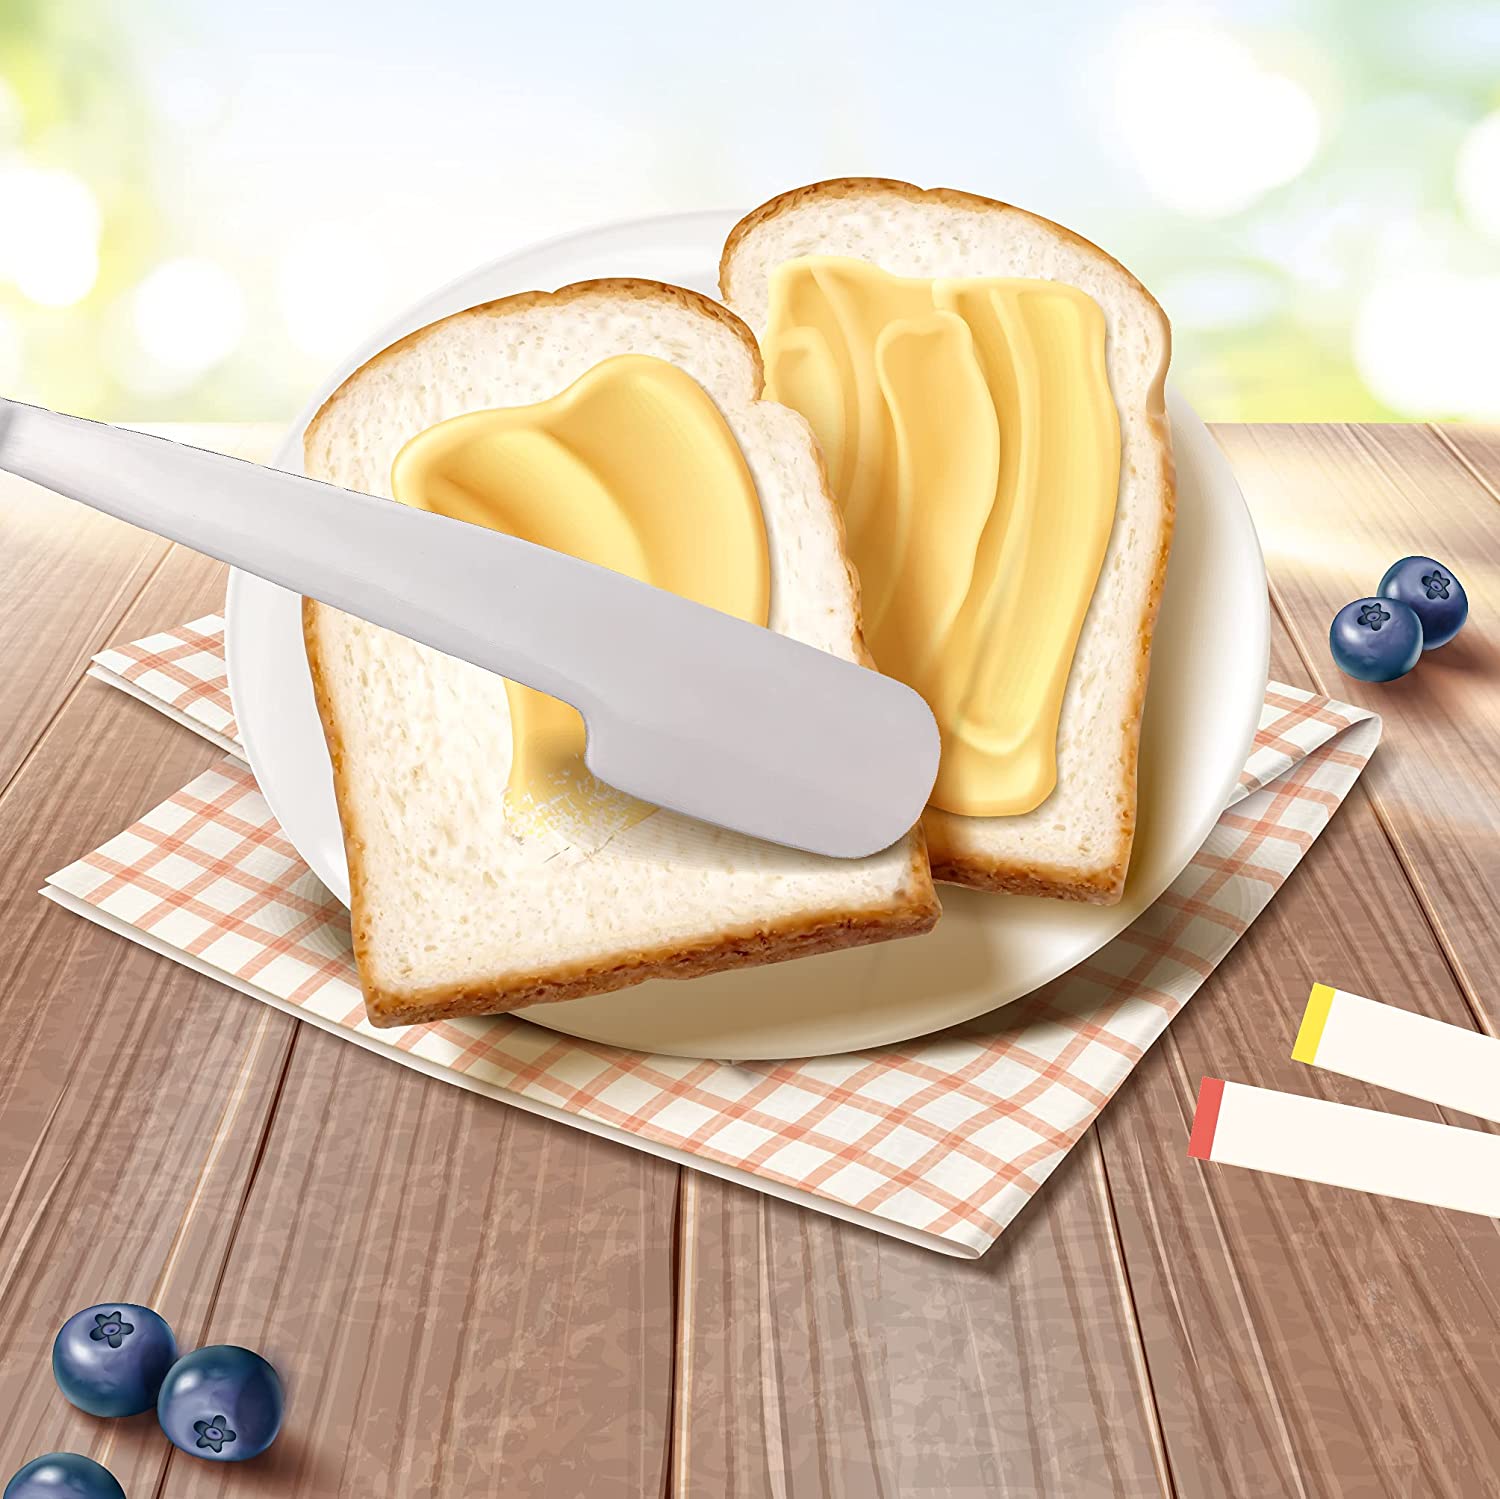 Stainless Steel spatula Spreader Knife, peanut butter and jelly, chocolate  or strawberry jam stirrer & jar scraper multifunction Stir, scrape, and  spread for BIG Jars with clean hands .By Simple preading 